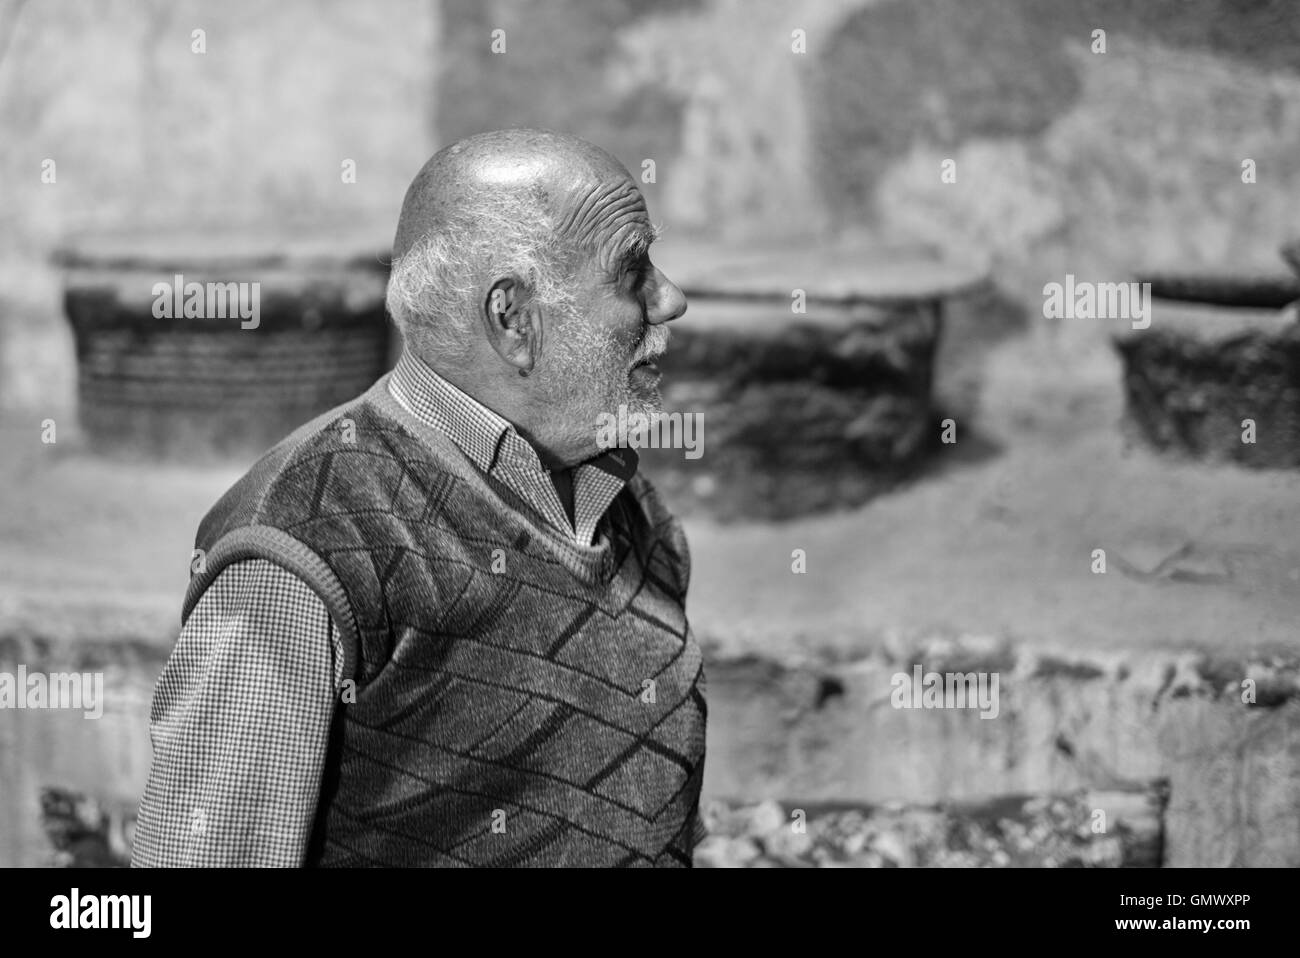 Mohammed Mehdi Mohhebi , oil processing shop owner in Isfahan, Iran.  A black and white portrait. Stock Photo